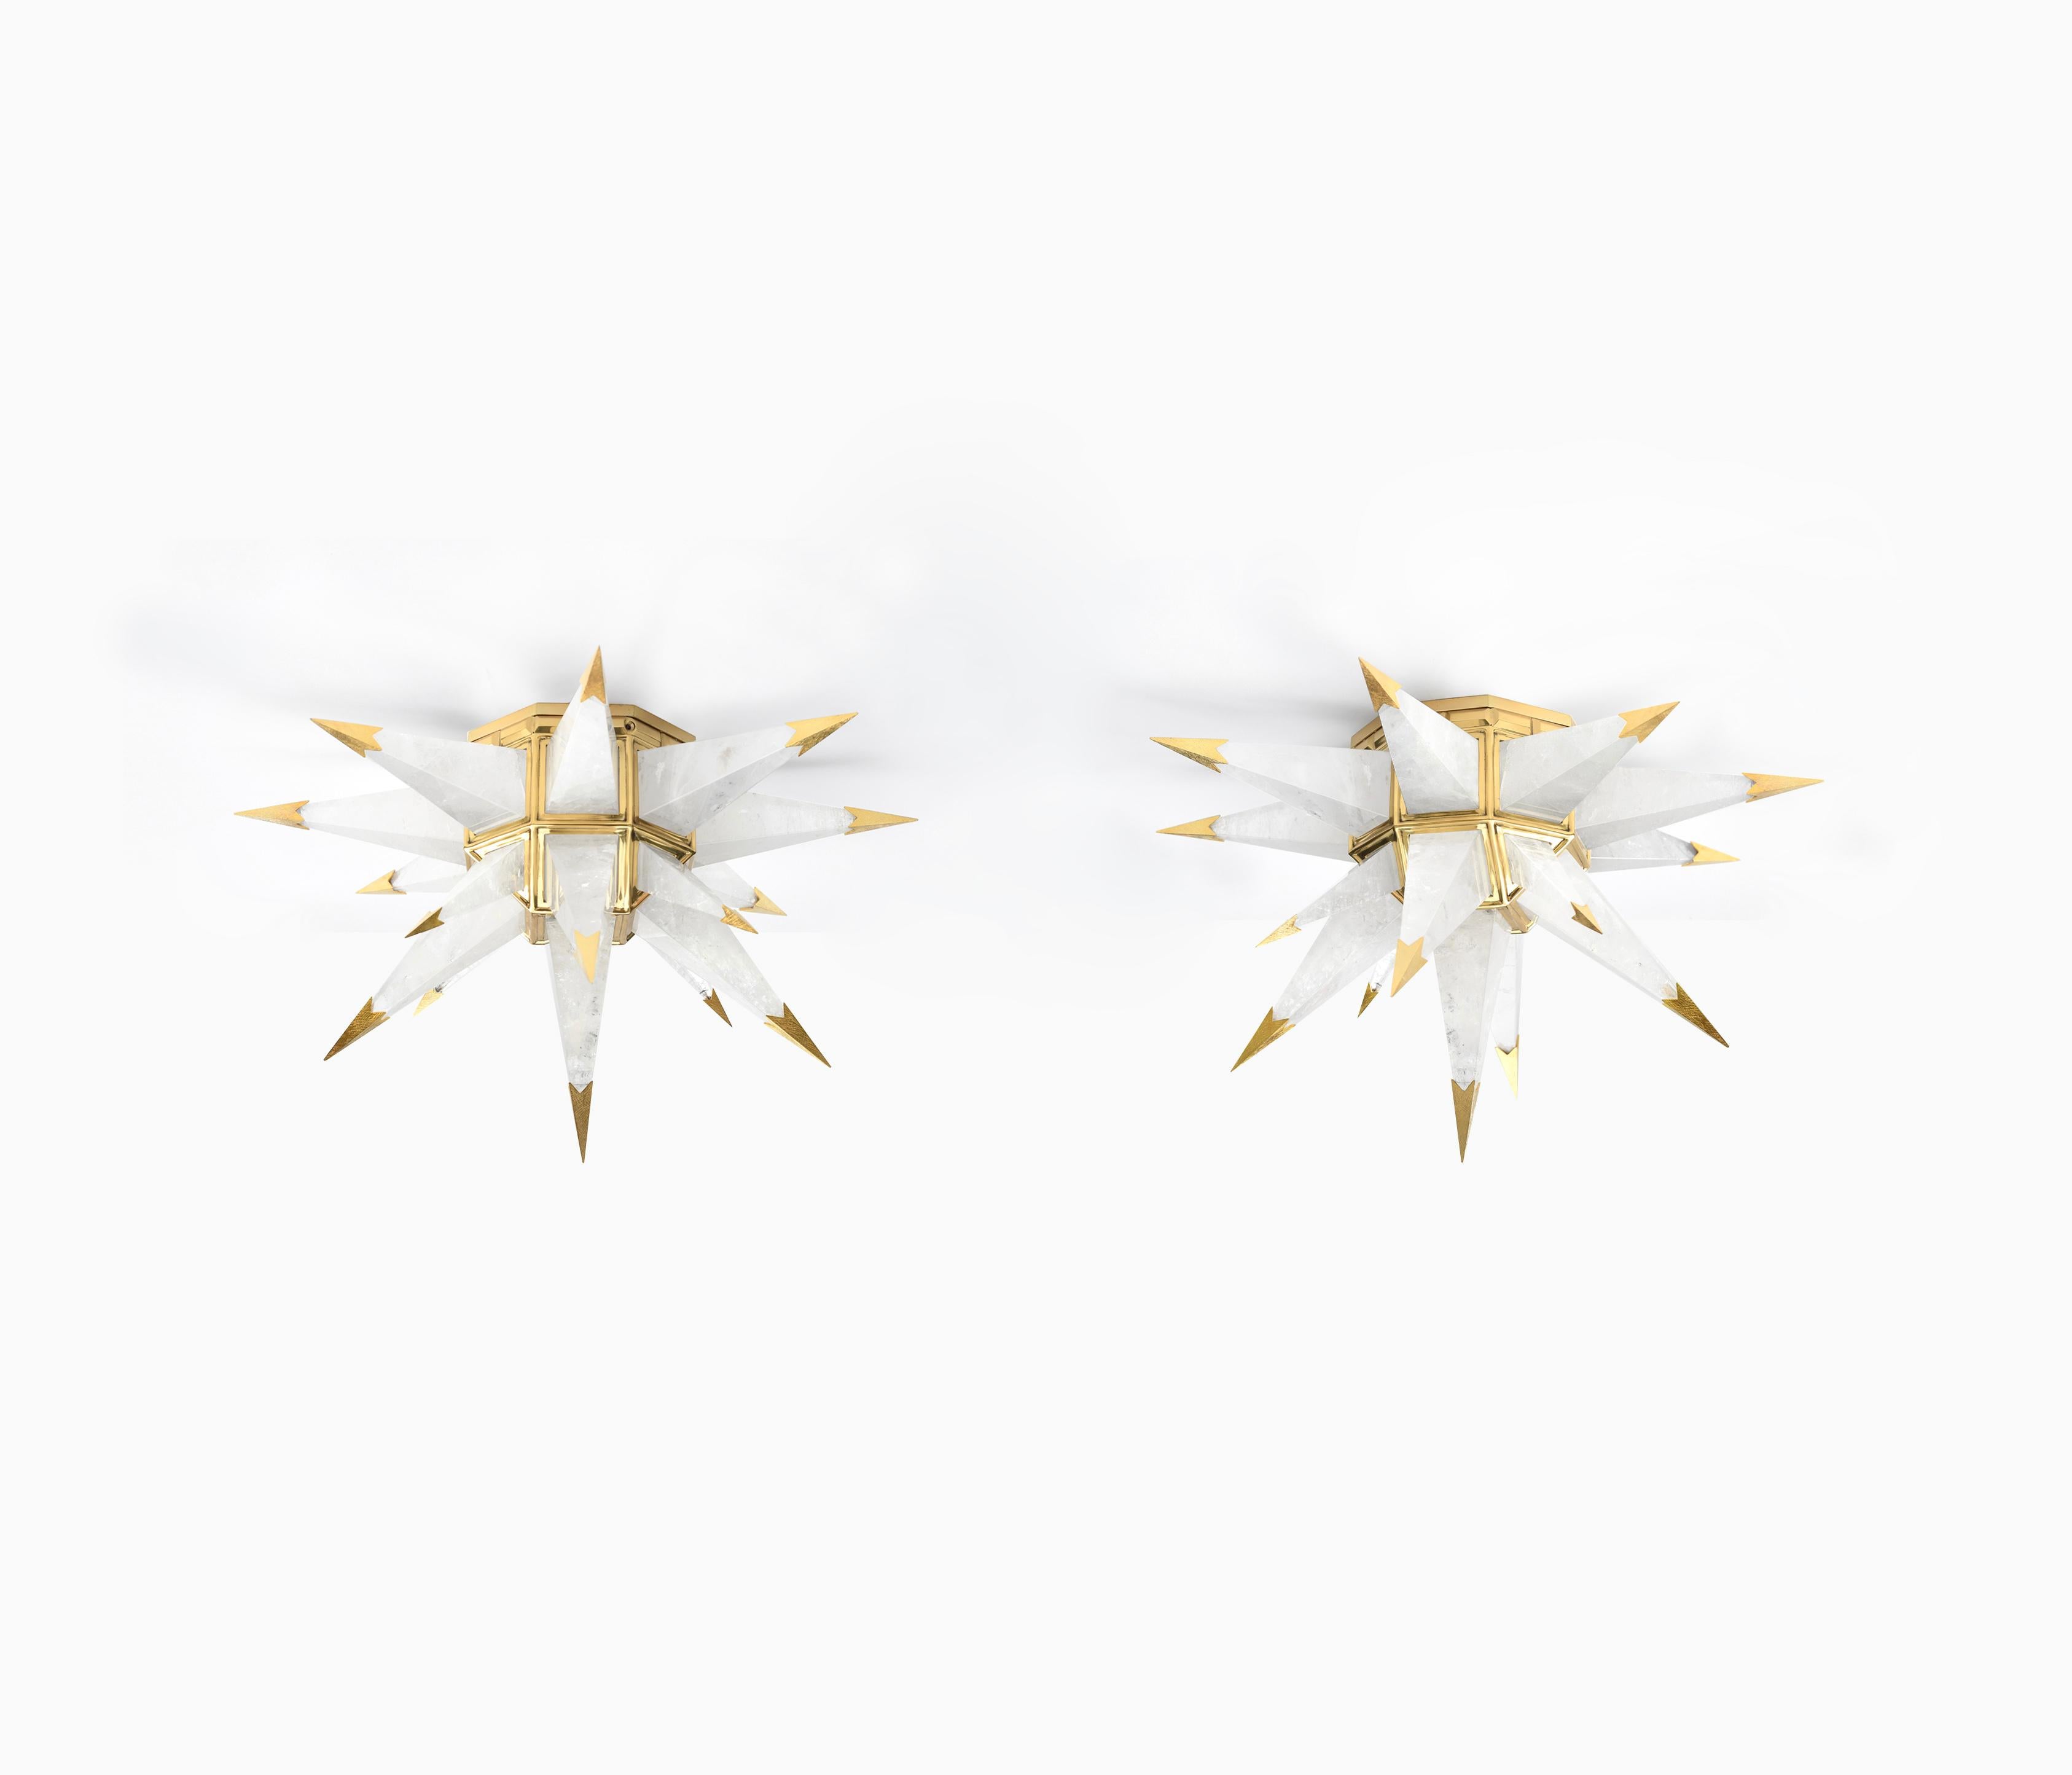 Pair of star form rock crystal flush mounts with polish brass frames and tips. Created by Phoenix Gallery, NYC.
Custom size, quantity, and finish upon request.